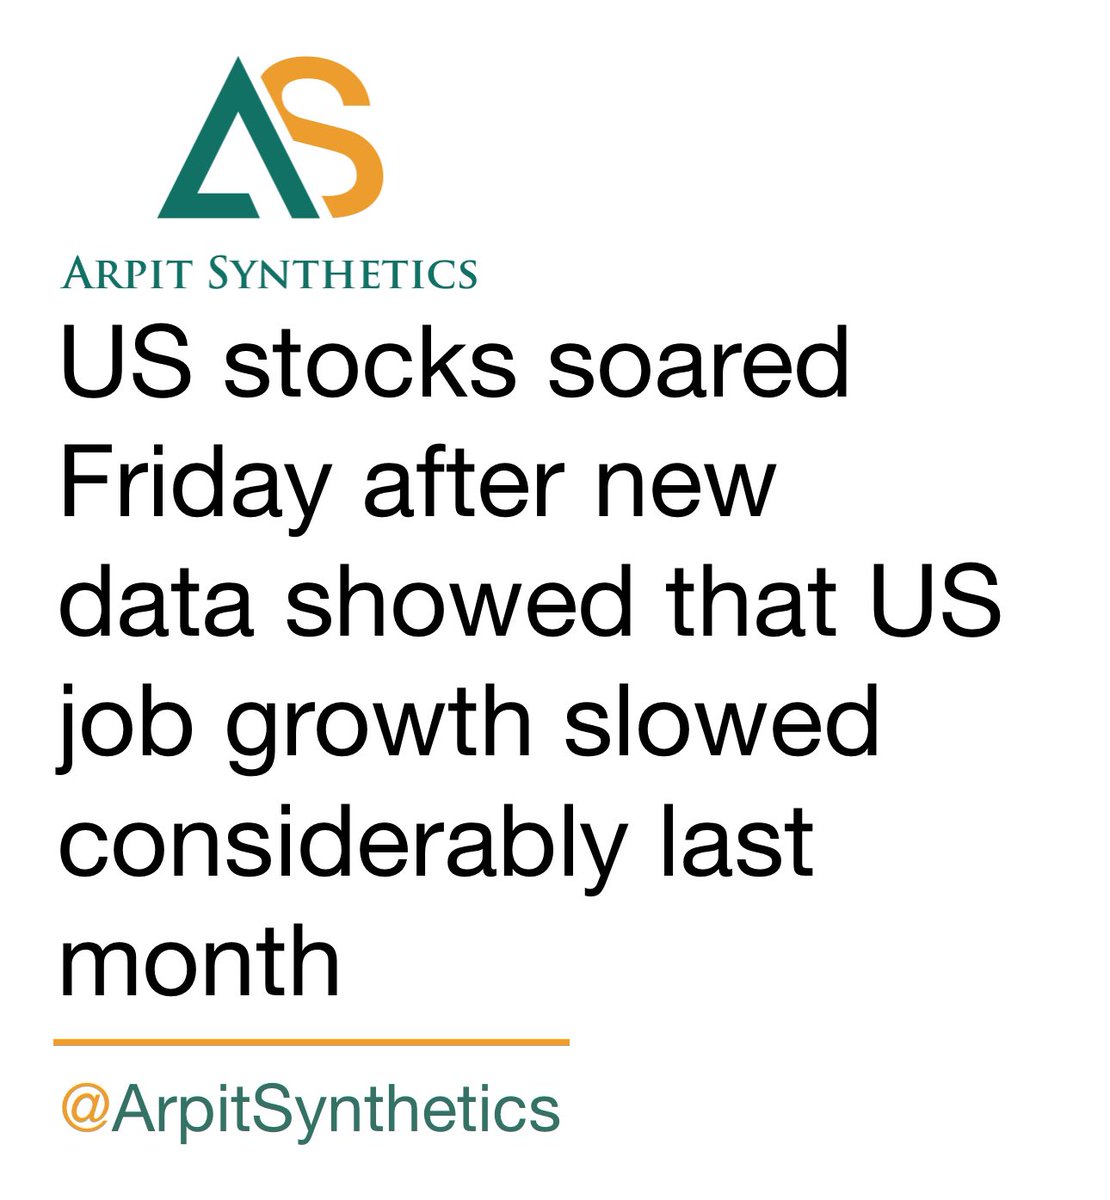 #chemicalupdate #arpitsynthetics #chemical #worldchemistry #innovation #industry #engineering #hygiene #global #AI #polymer #apple #color #colour #india #leader #partnership #biodegradable #recycle #recycled #fibre #landfill #ocean #Artificalintelligence #asia #usa #uk #africa